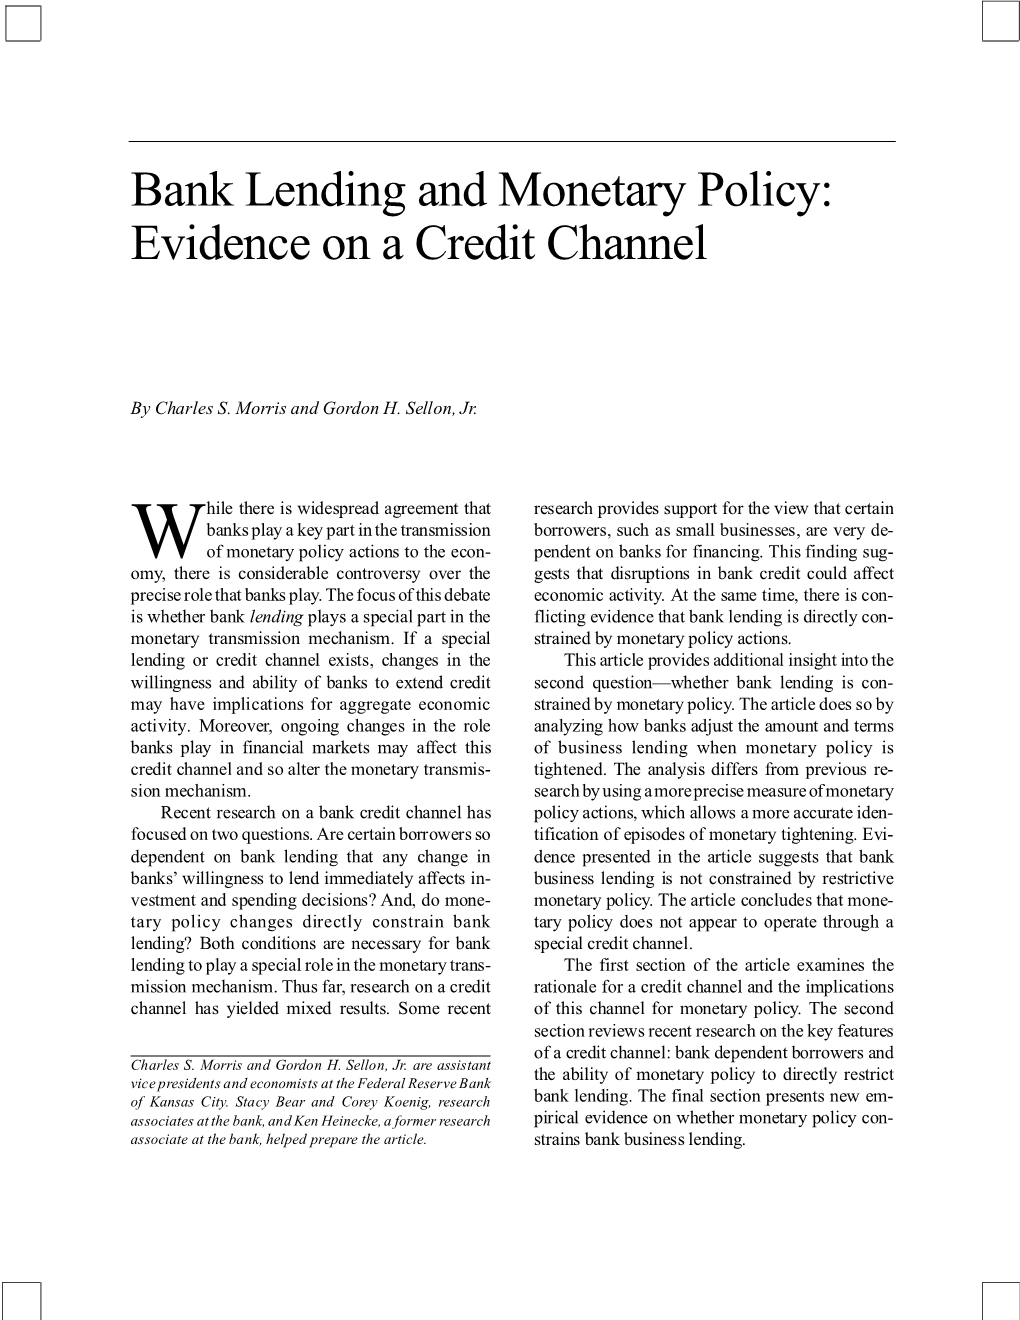 Bank Lending and Monetary Policy: Evidence on a Credit Channel